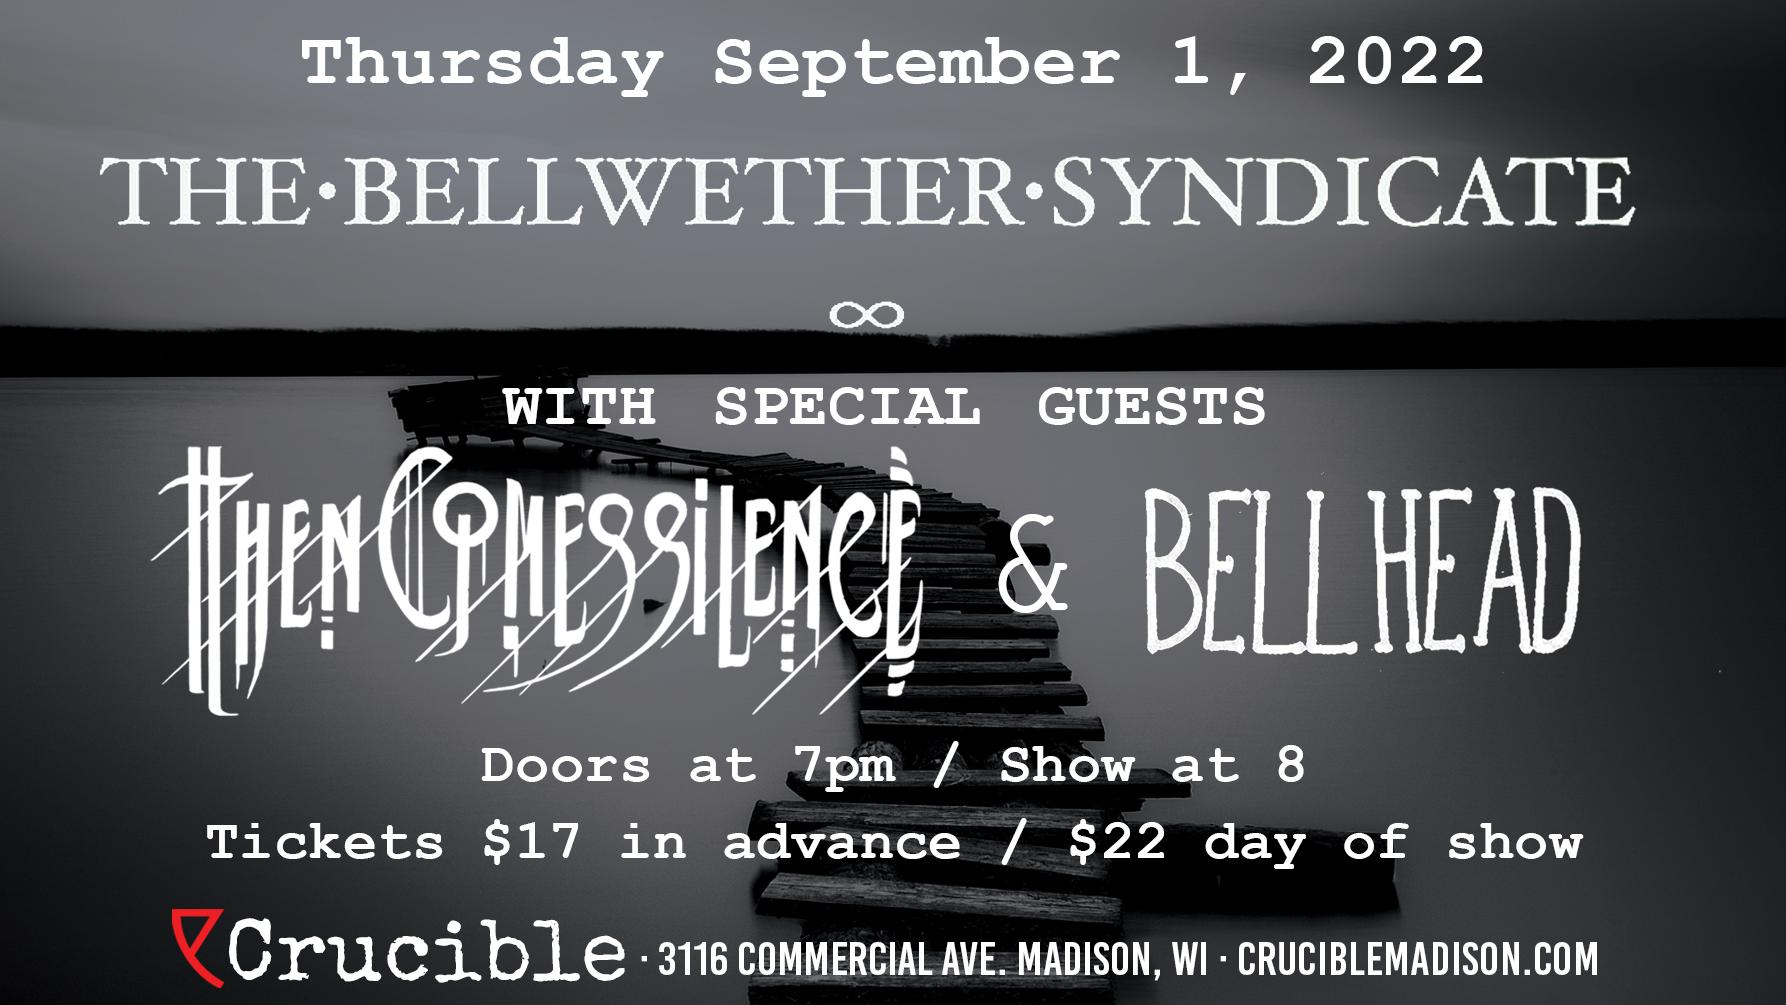 The Bellwether Syndicate